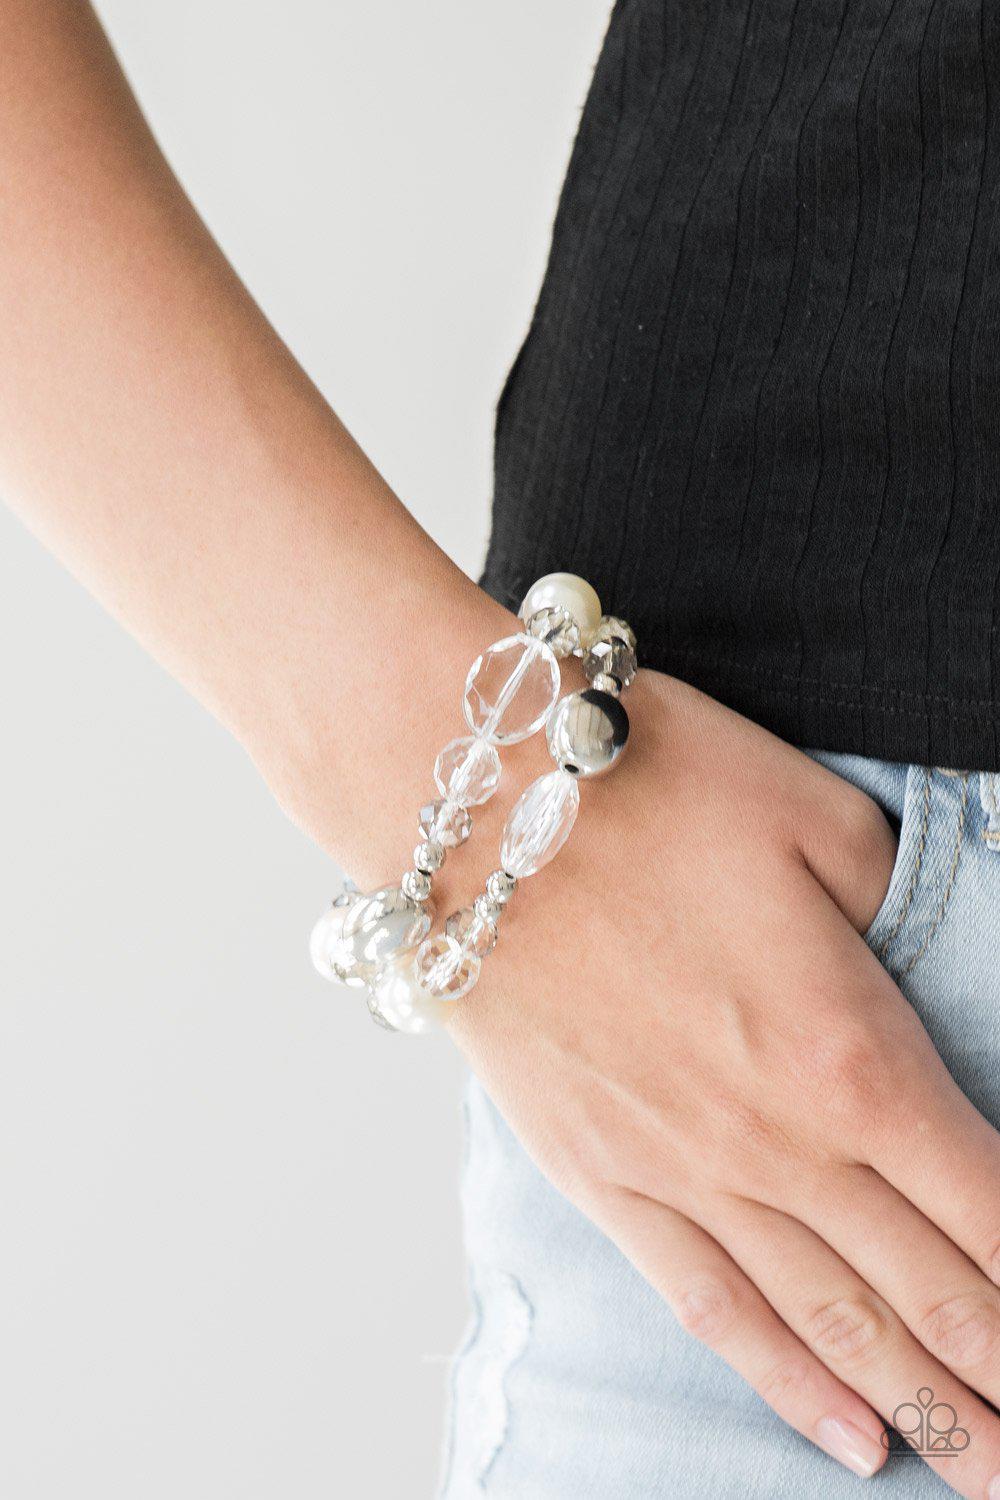 Downtown Dazzle Silver and White Bracelet Set - Paparazzi Accessories-CarasShop.com - $5 Jewelry by Cara Jewels